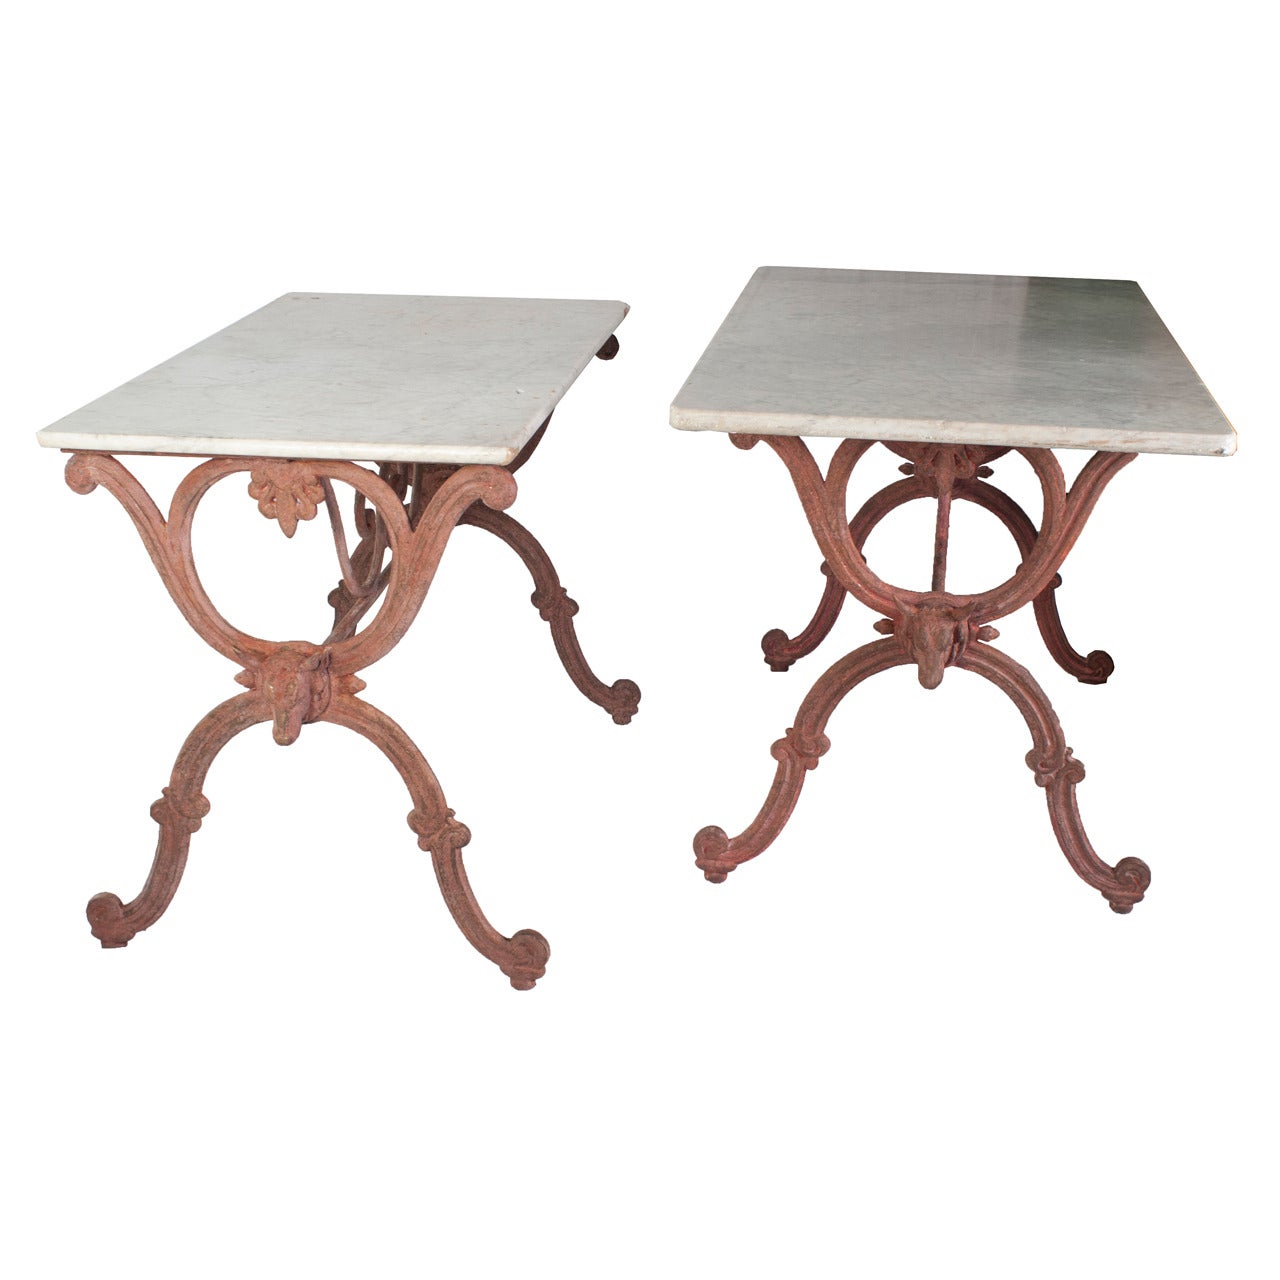 A Pair of Tables with Bull Heads Decoration with a White Marble Top